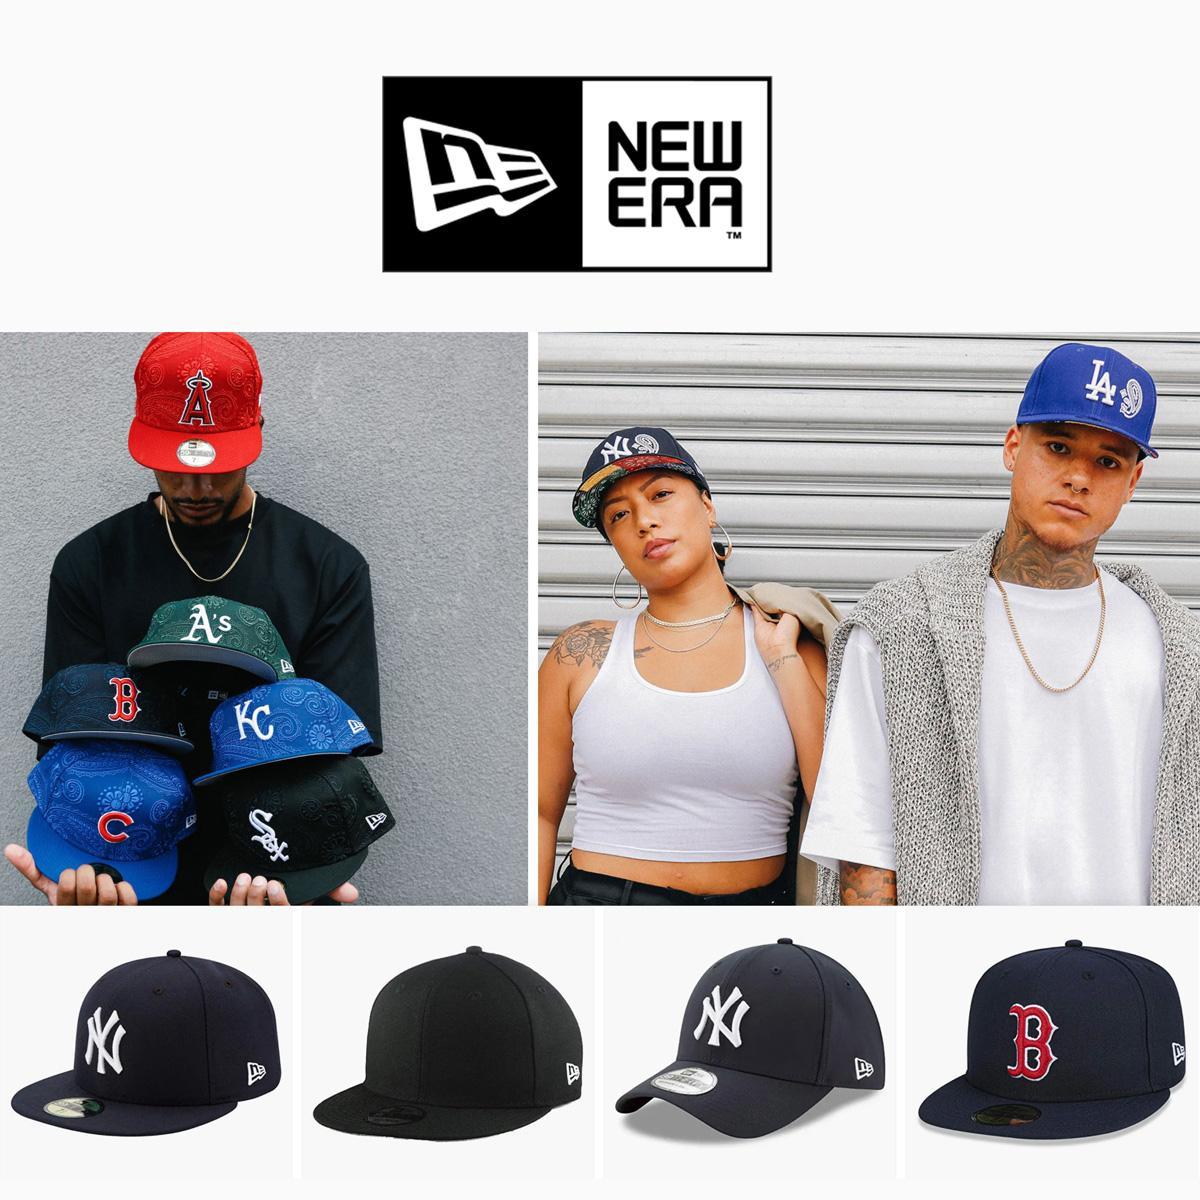 New Era Size guide for men, women and kids (size chart included)